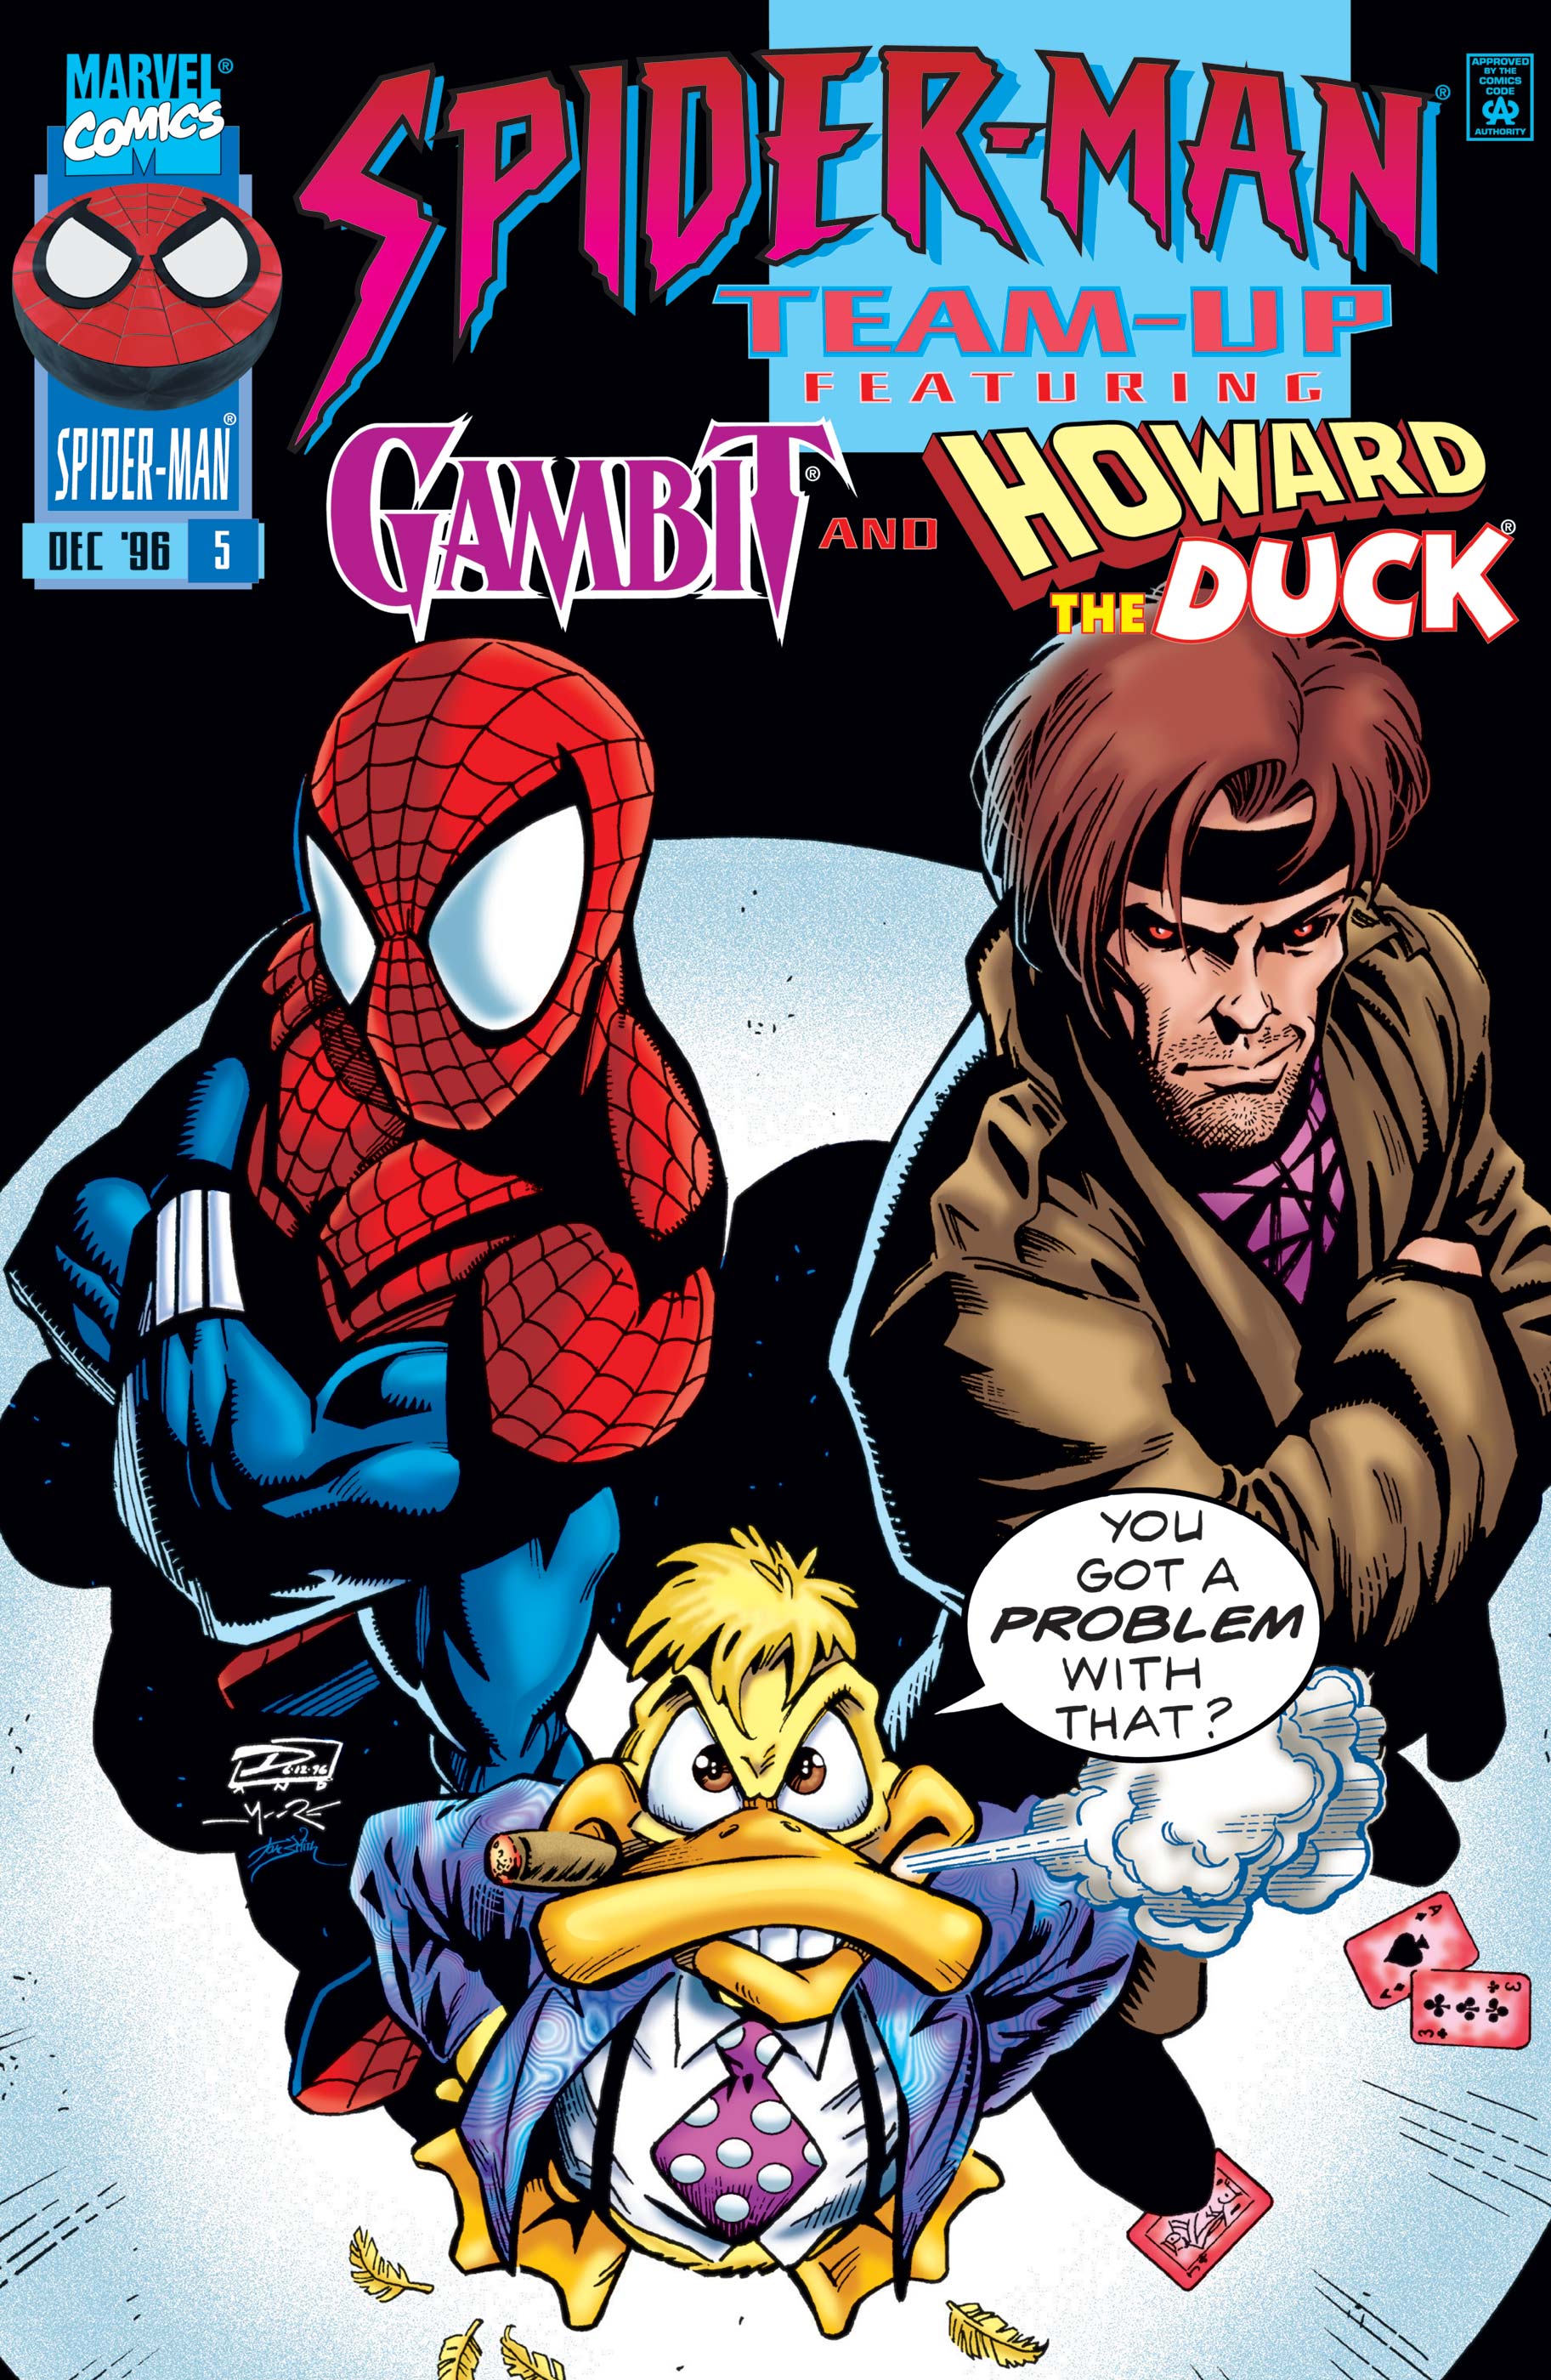 Spider-Man Team-Up (1995) #5 | Comic Issues | Marvel